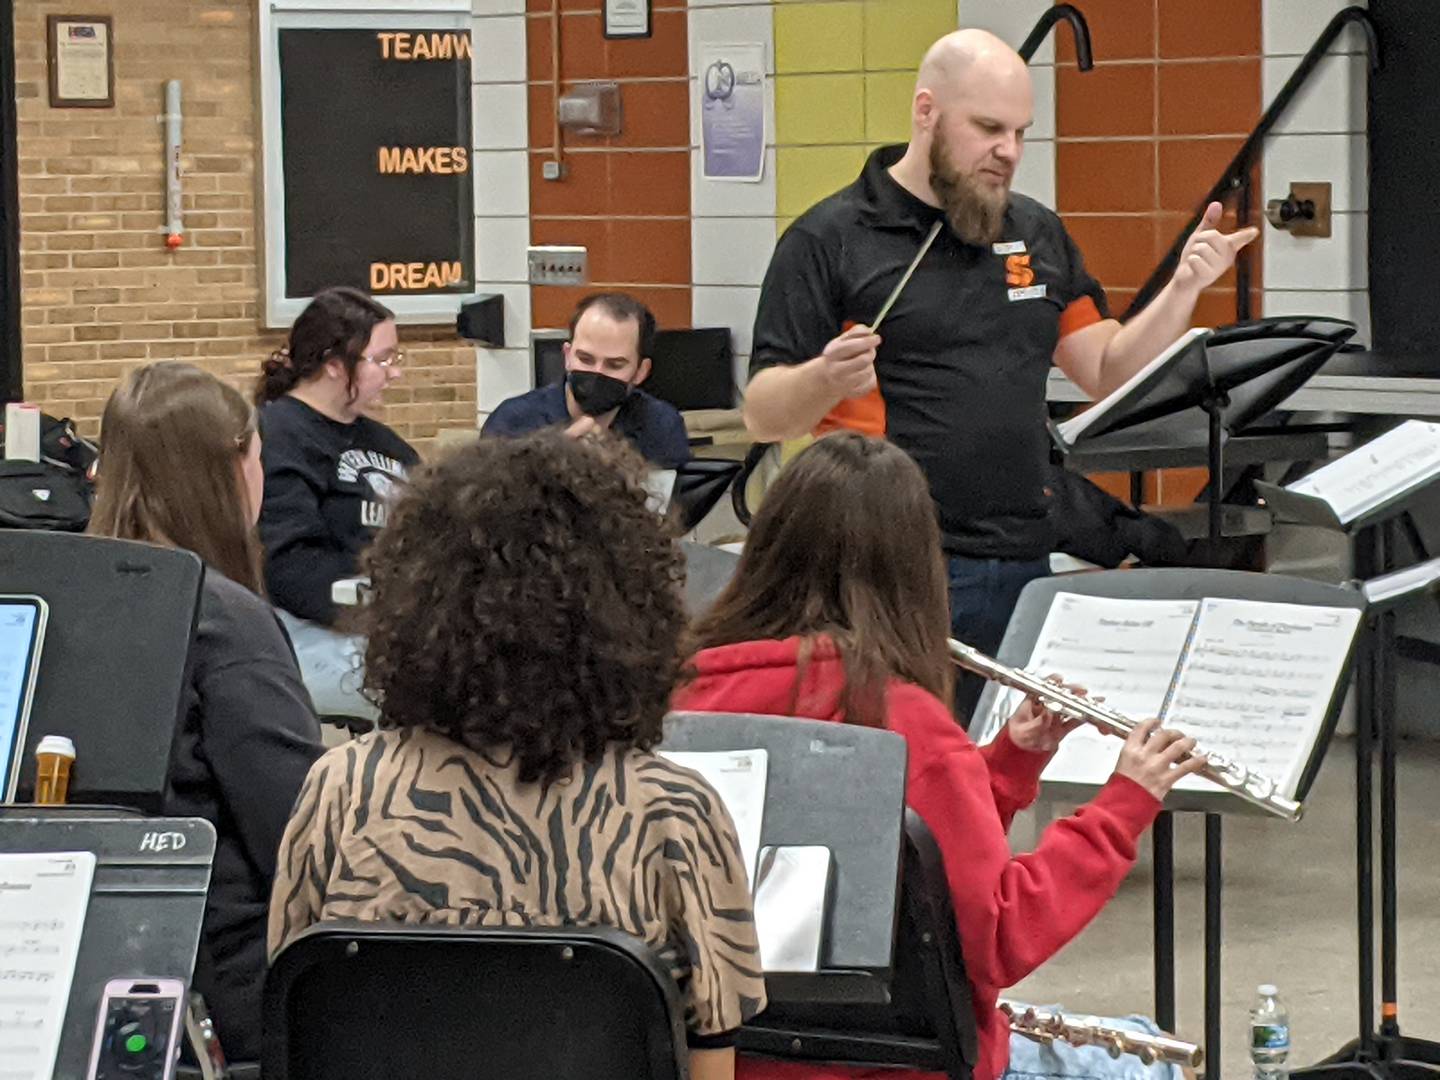 Justin Heinekamp, director of bands and district music coordinator for Sandwich CUSD 430, directs the pit orchestra during a March 7 rehearsal for "Cinderella."